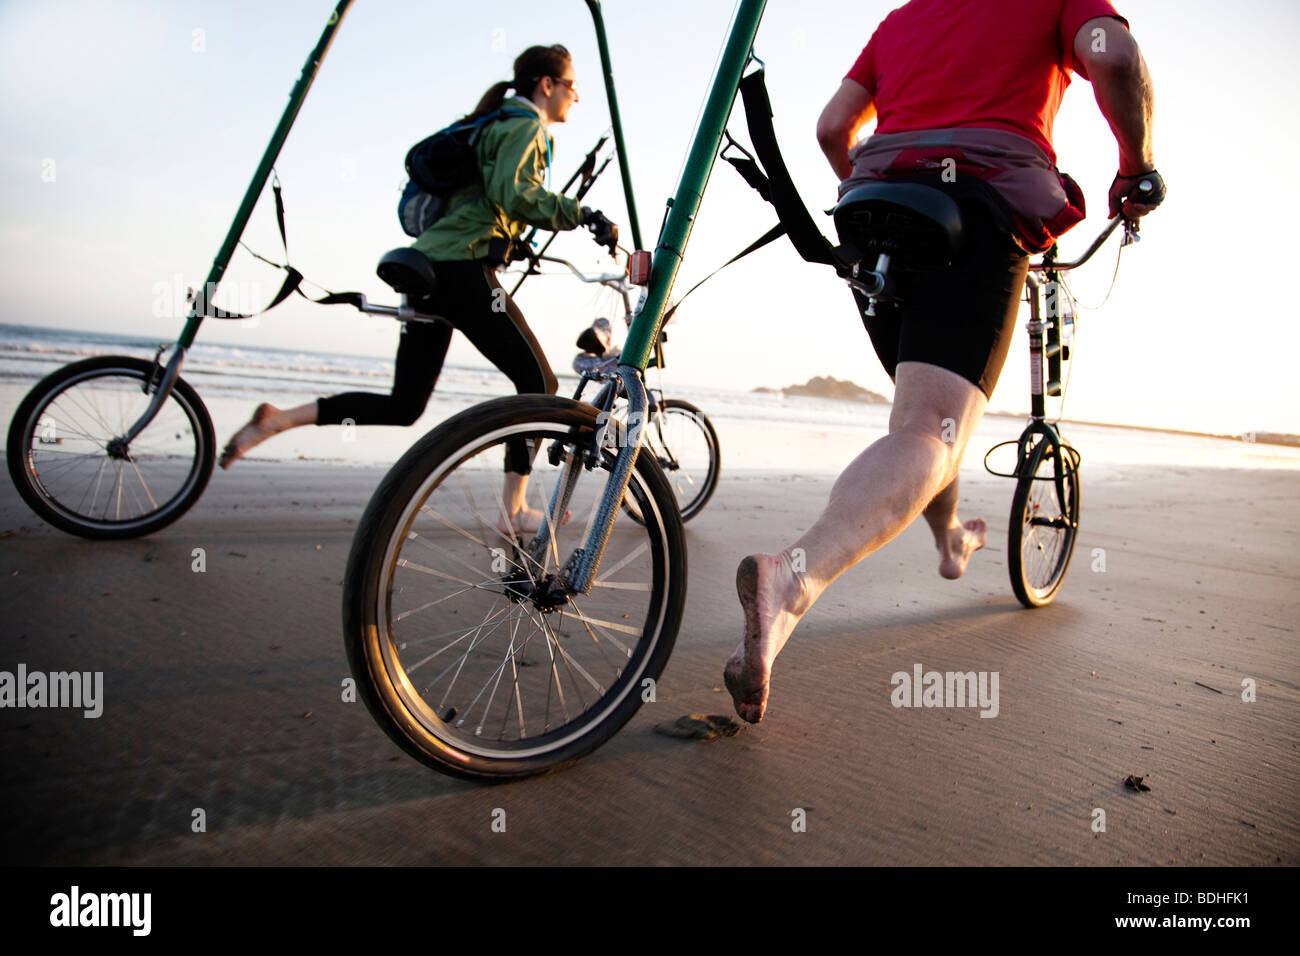 A new form of bicycle is tested on the beach at sunset. Stock Photo